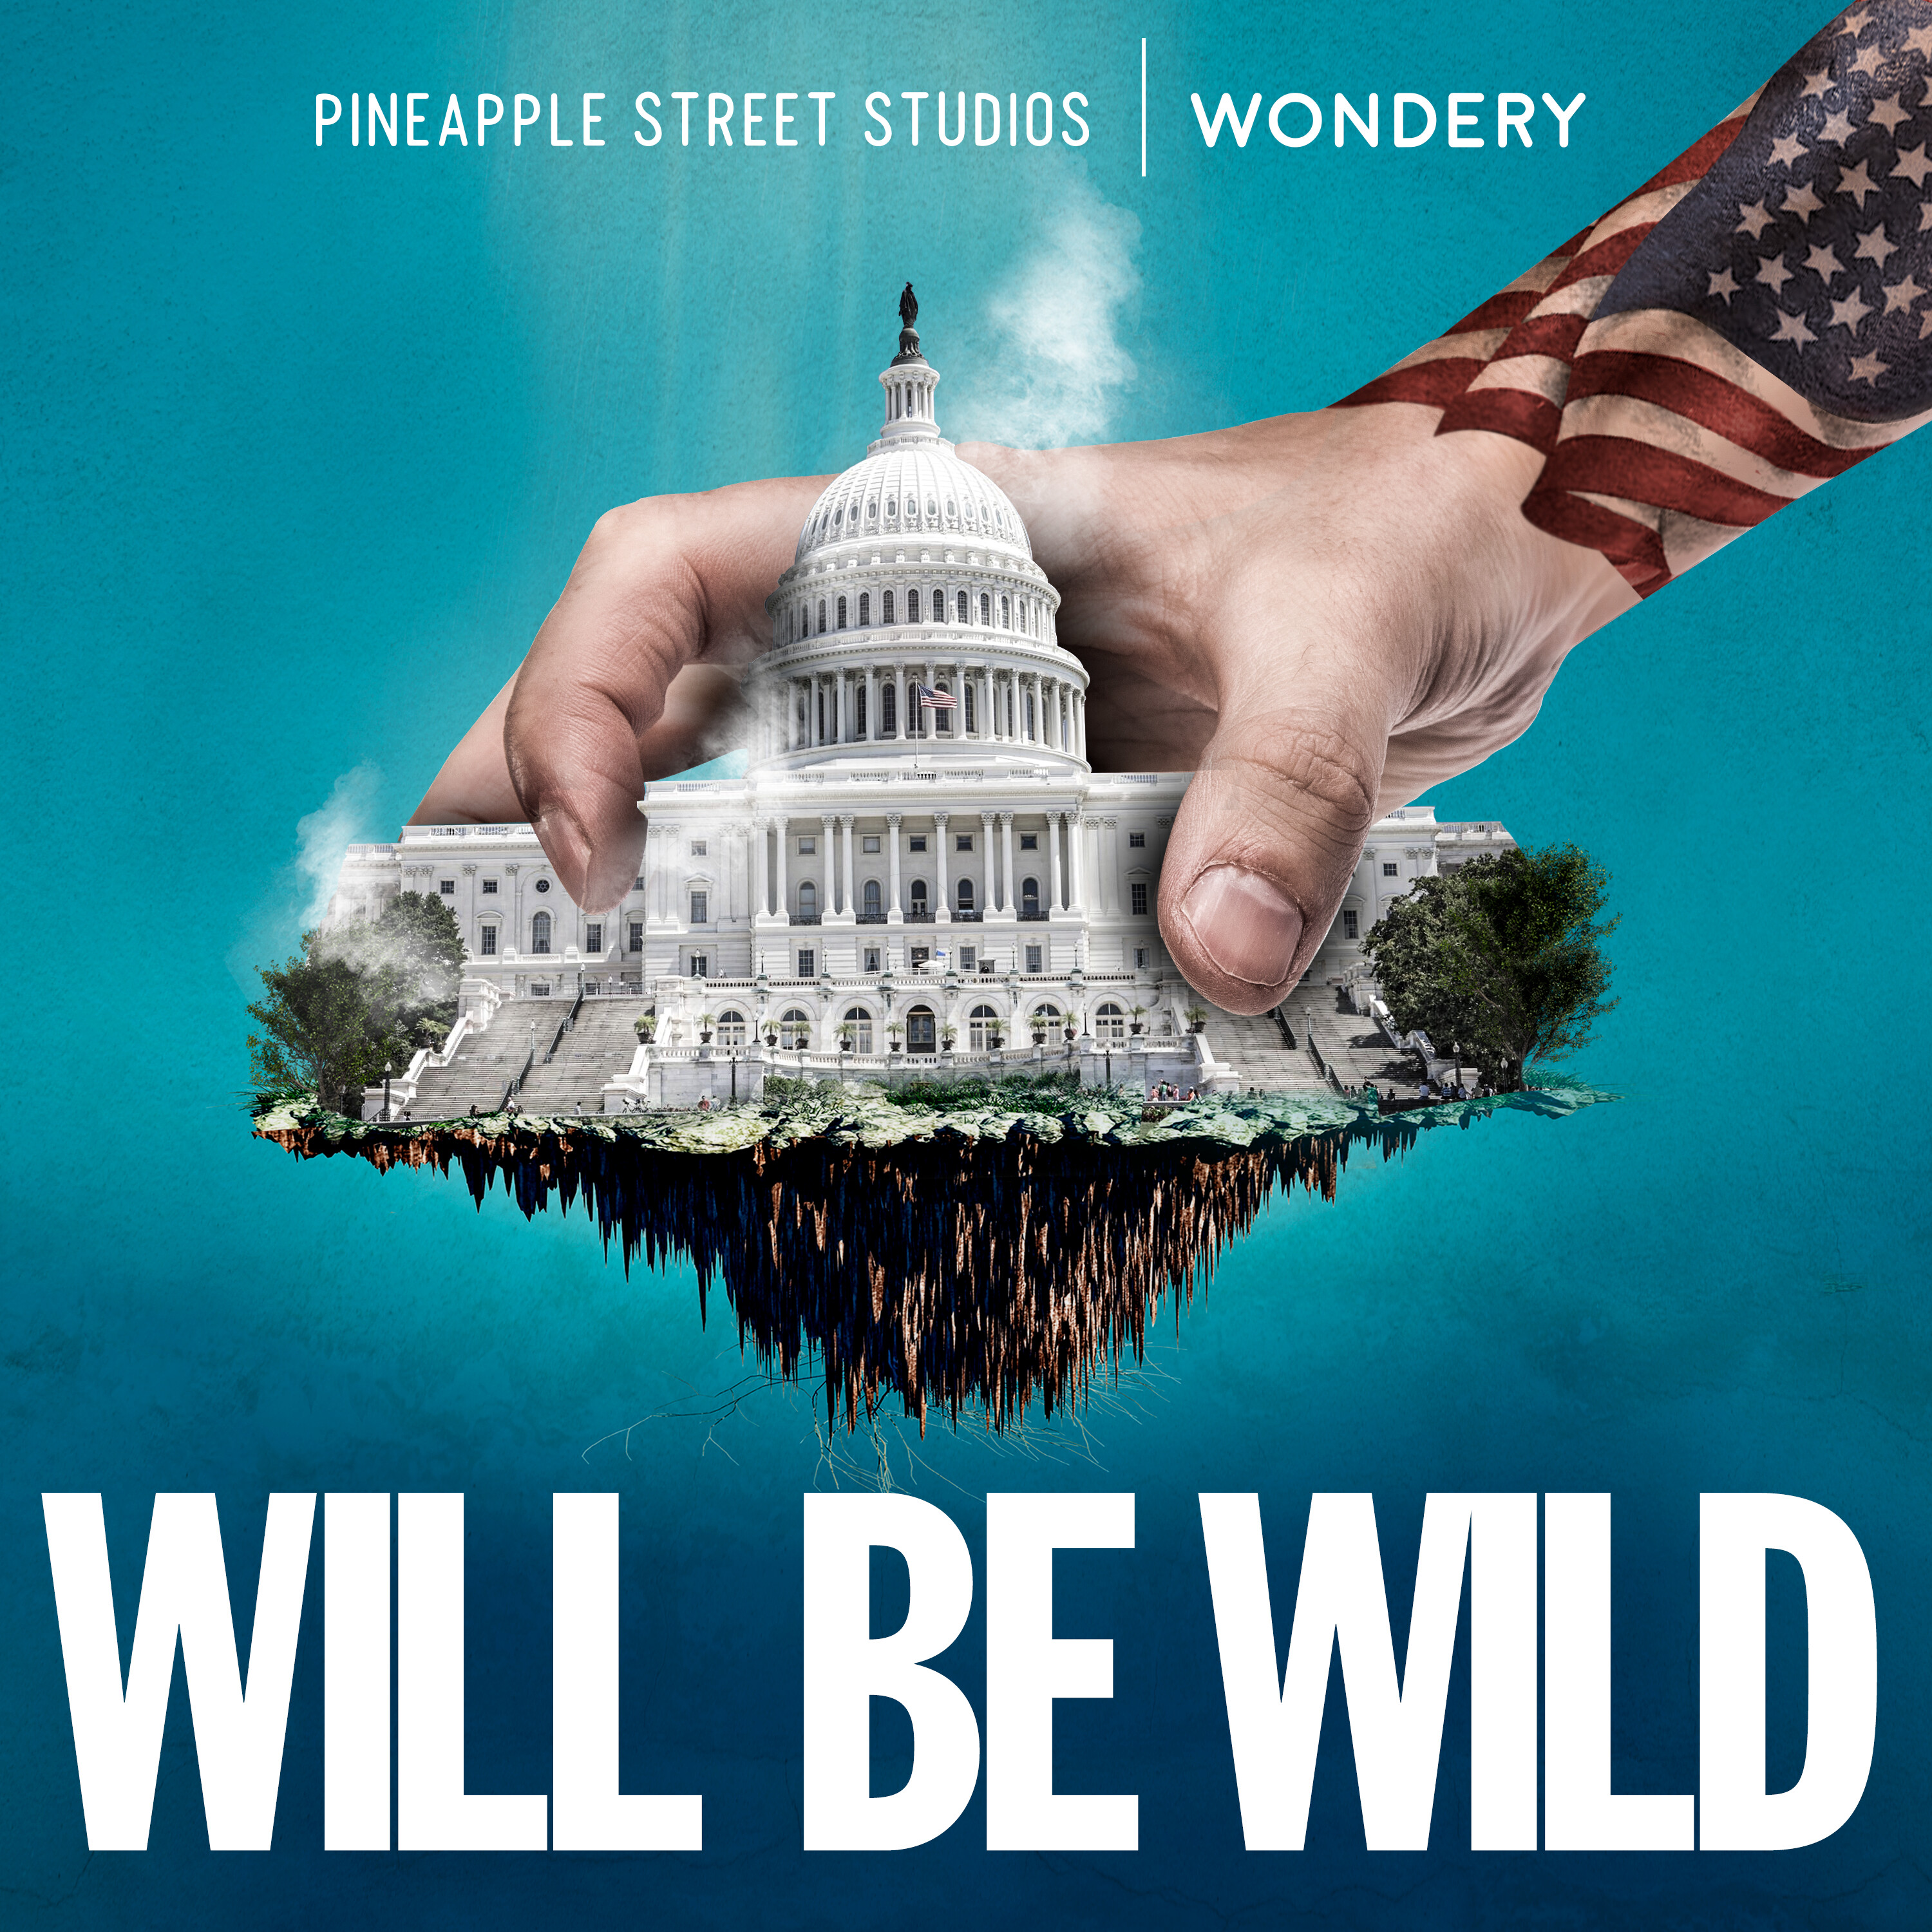 Introducing: Will Be Wild 